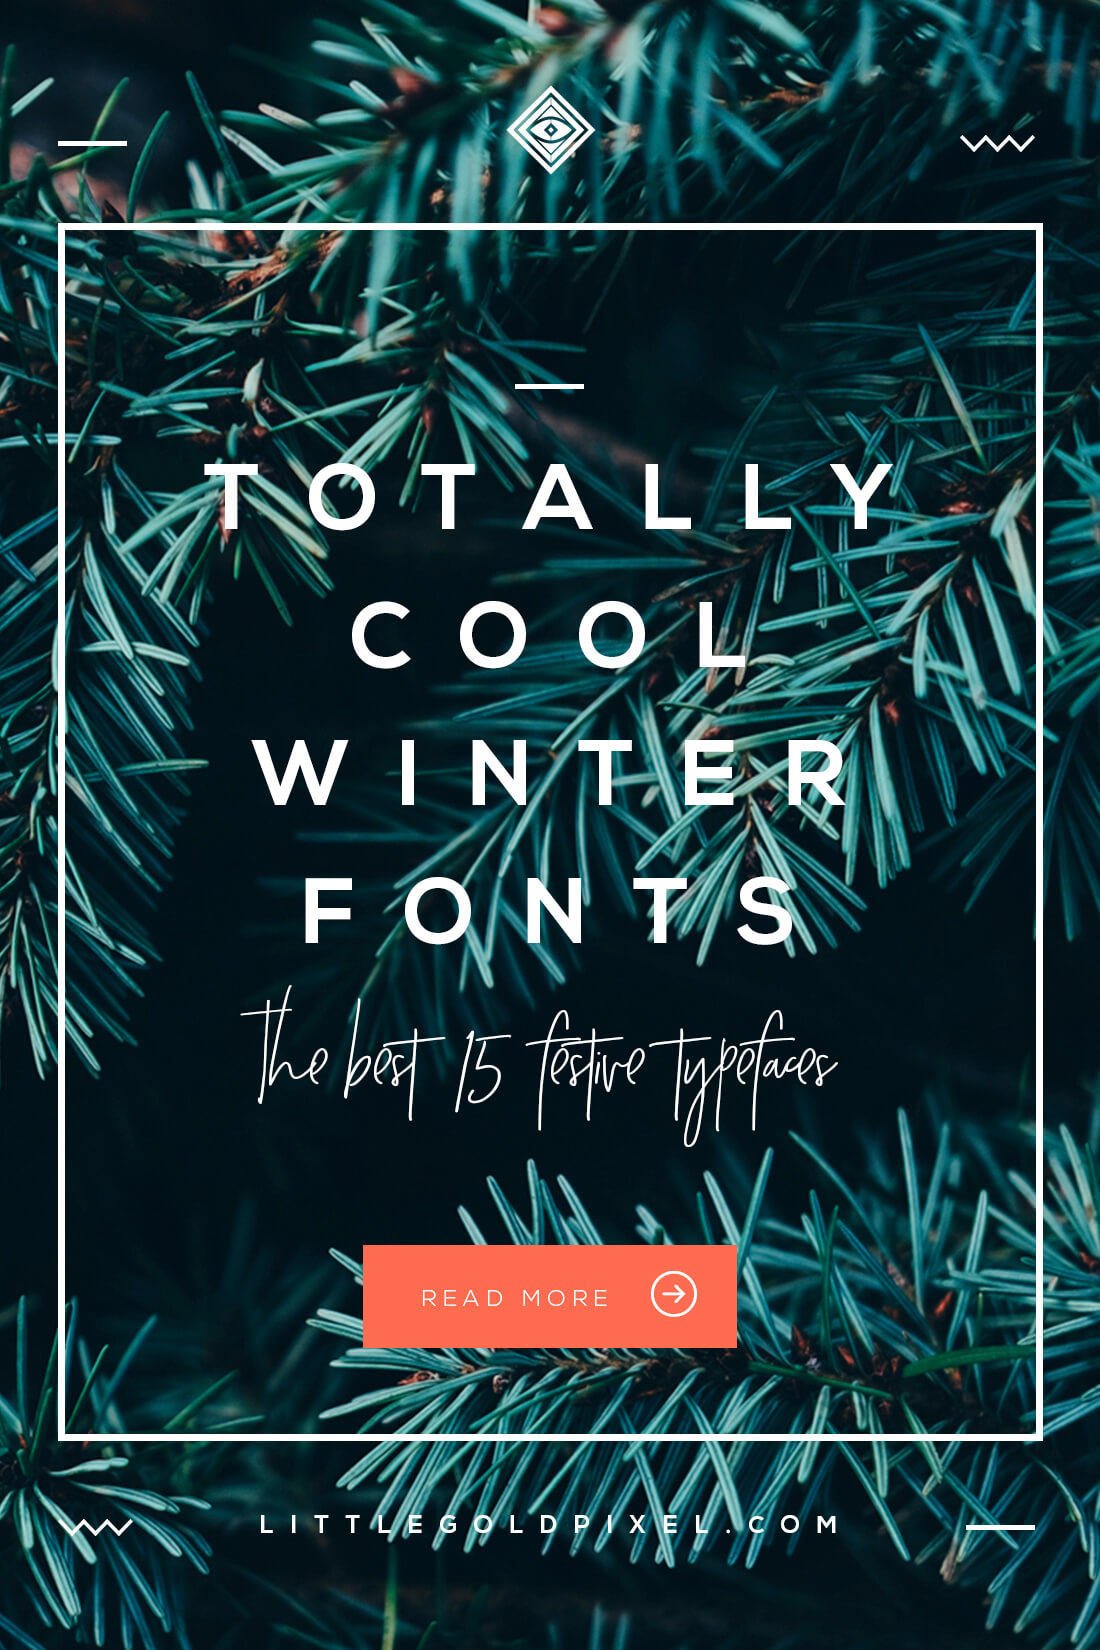 Winter Fonts • 15 Coolest Typefaces for Your Festivities • Little Gold Pixel • In which I round up 15 cool winter fonts to liven up your personal designs. Festive typefaces will help you celebrate the most wonderful time of the year. #winterfonts #typography #fontroundup #holidayfonts #holidaycardfonts